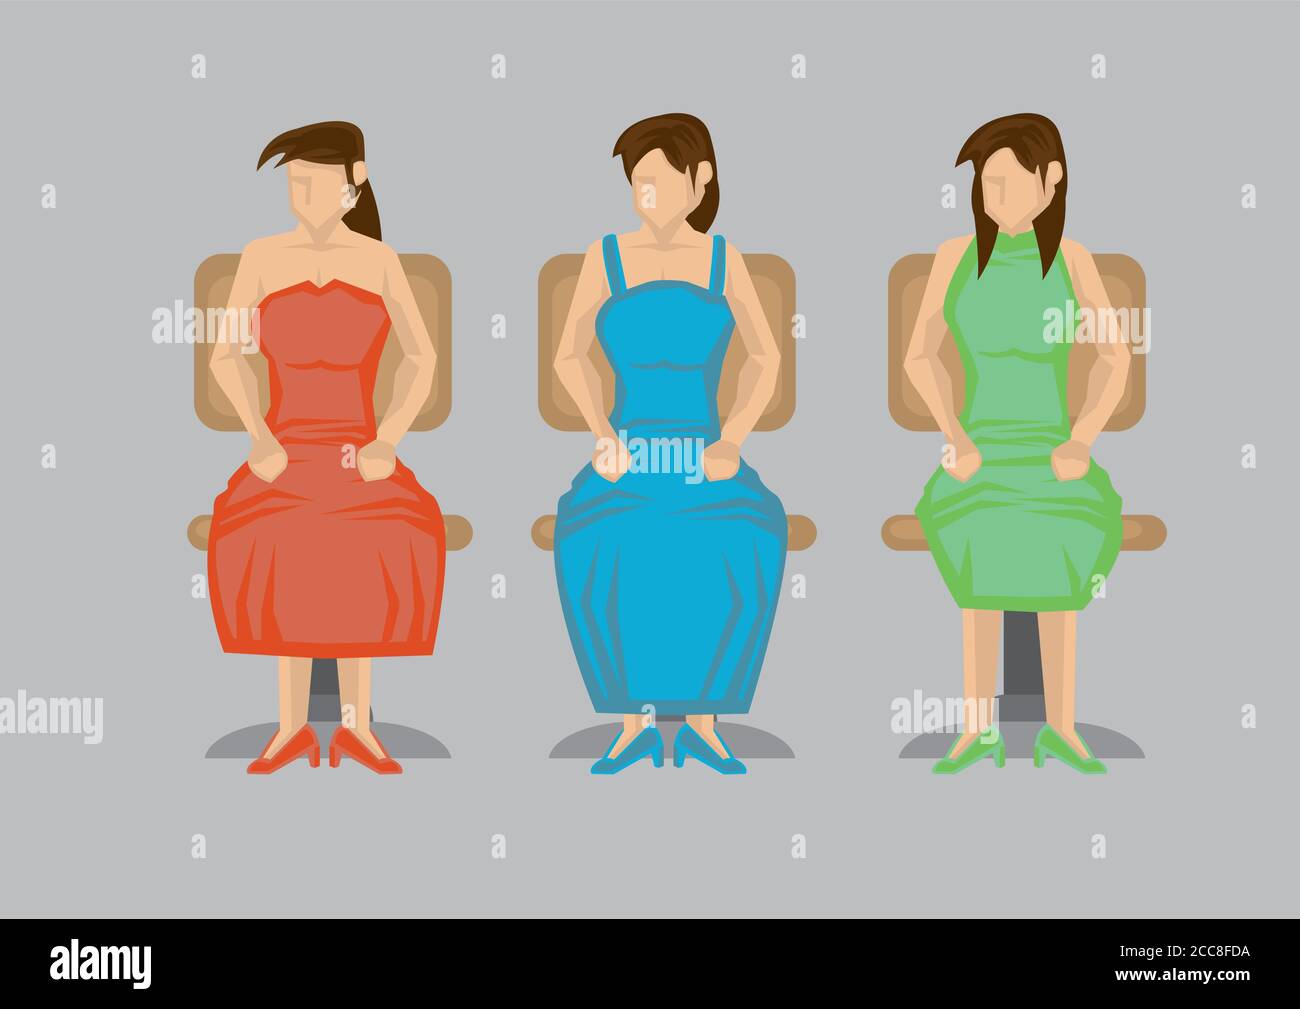 Woman in different style and color dresses sitting on swivel office chair. Cartoon character illustration isolated on plain background. Stock Vector